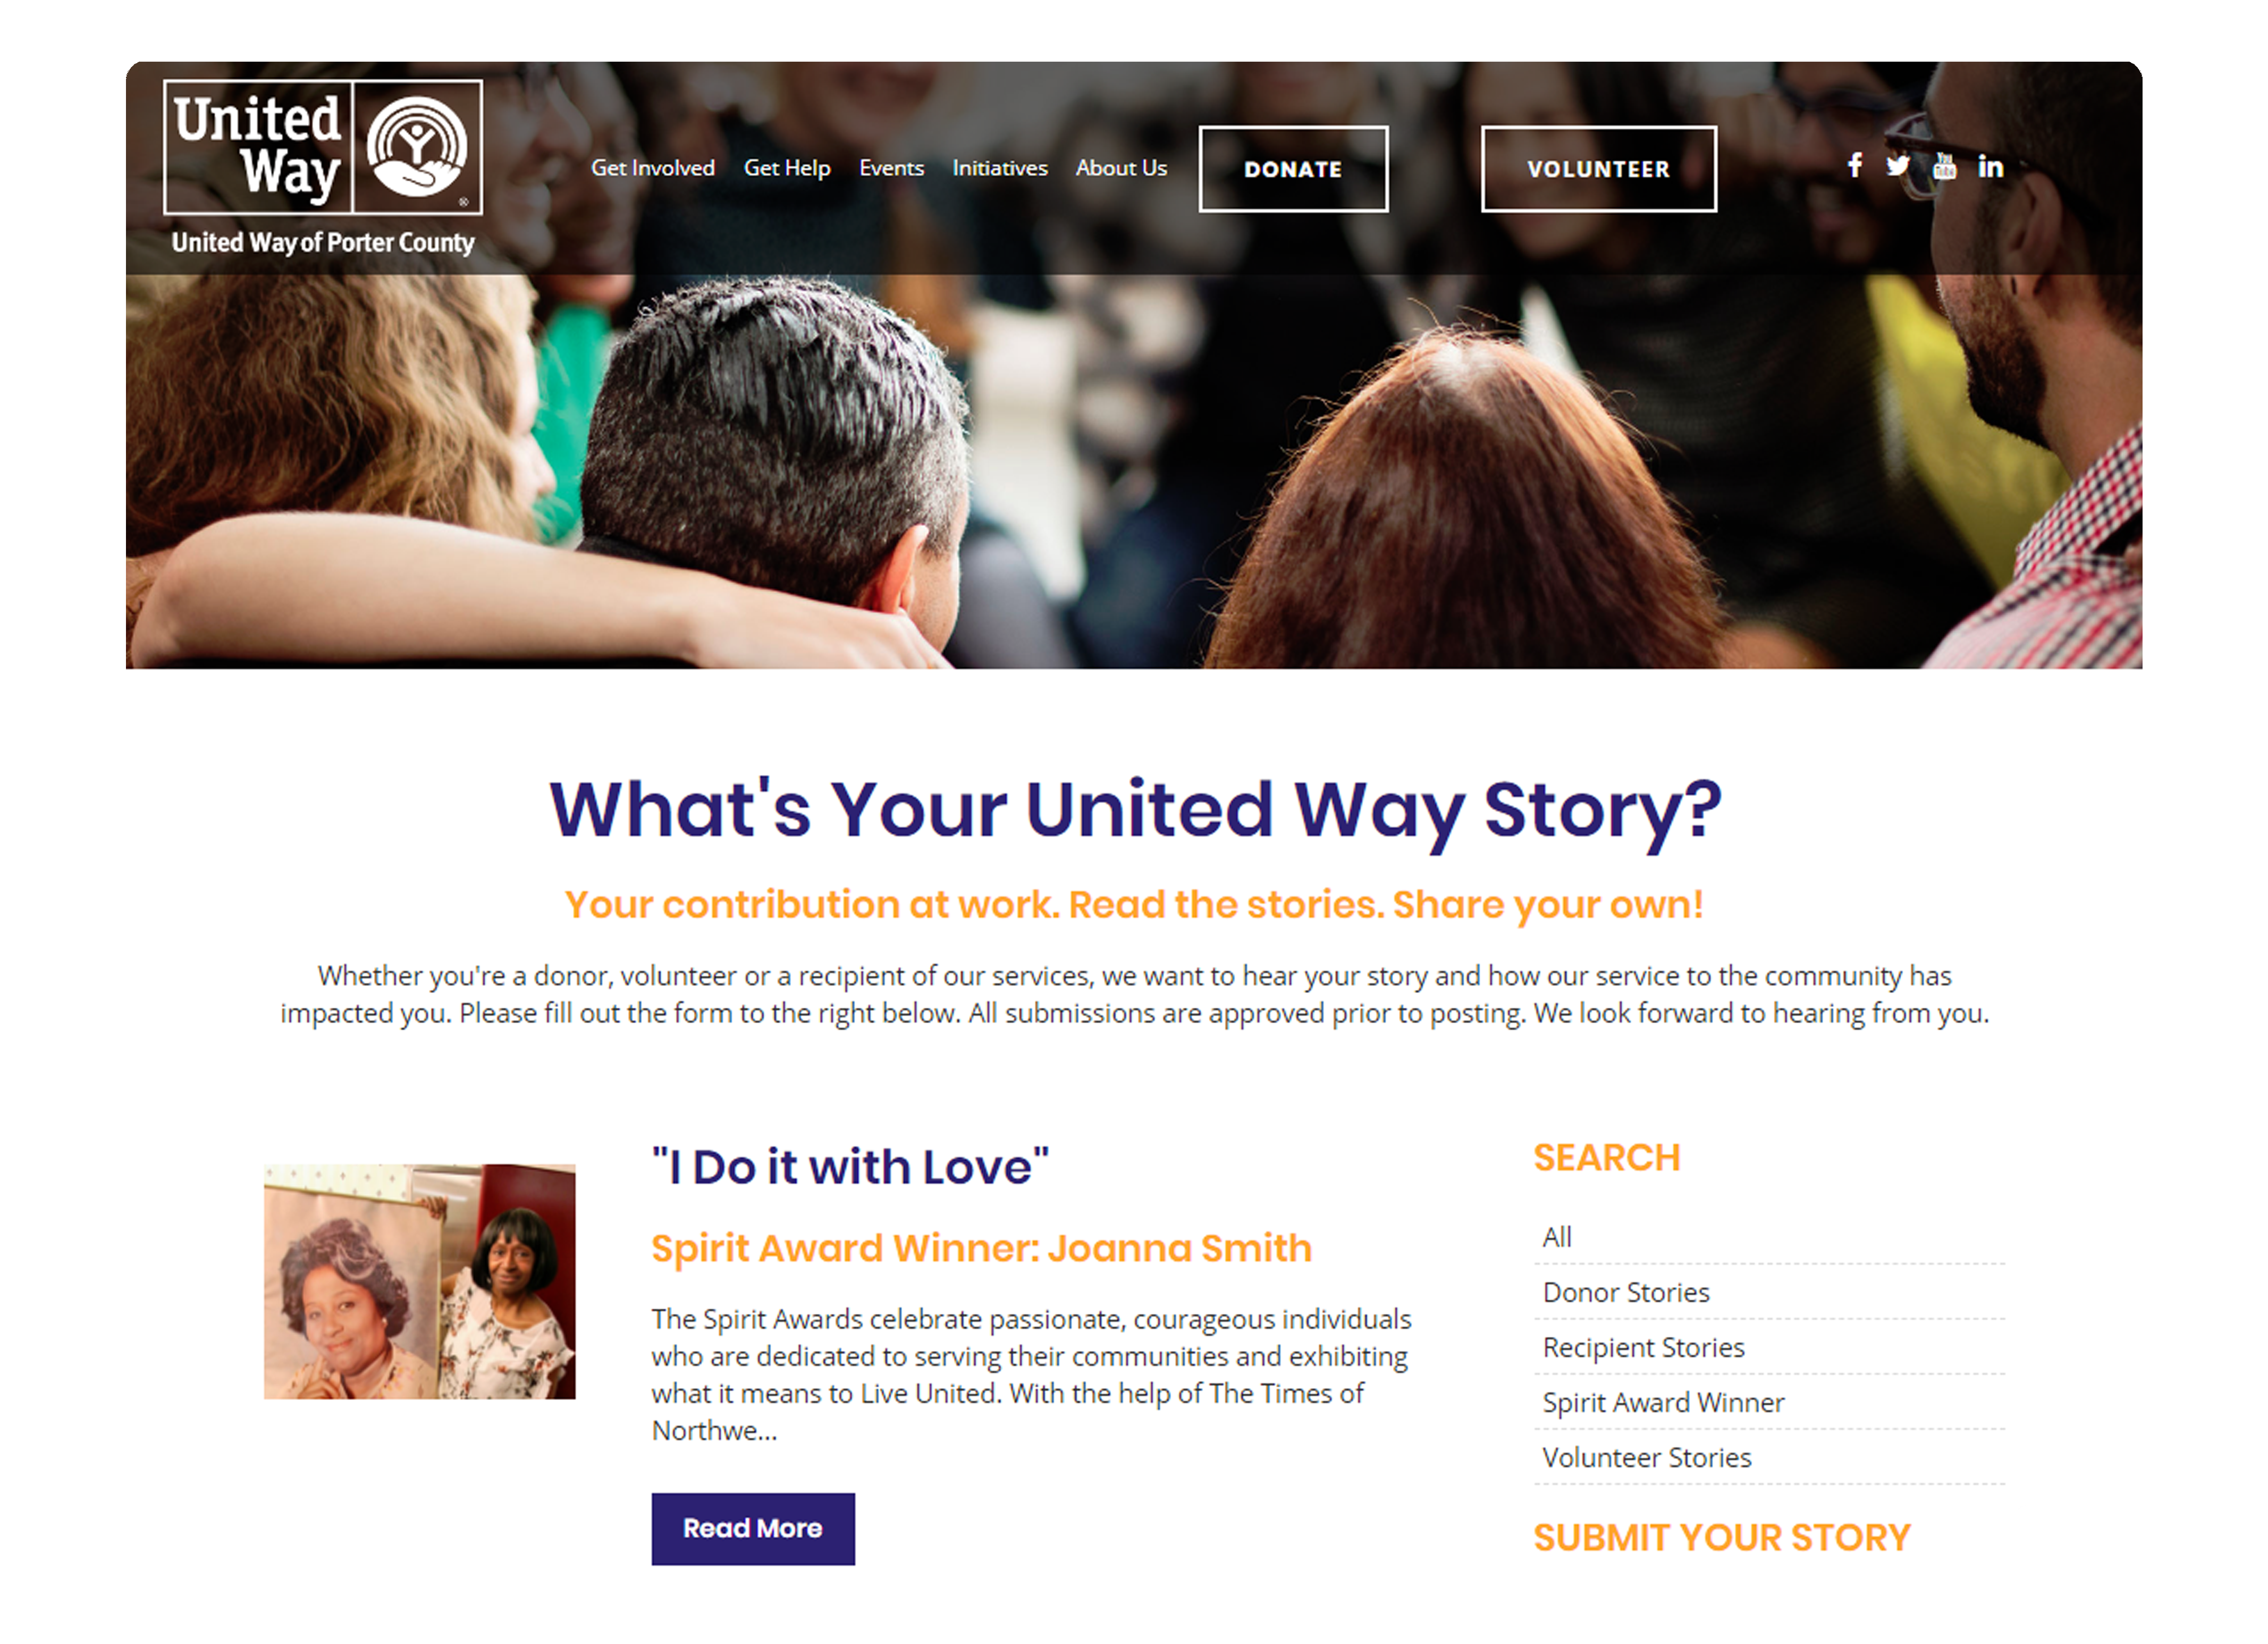 The image depicts a website paged dedicated to showcasing anecdotes from people involved with the nonprofit.